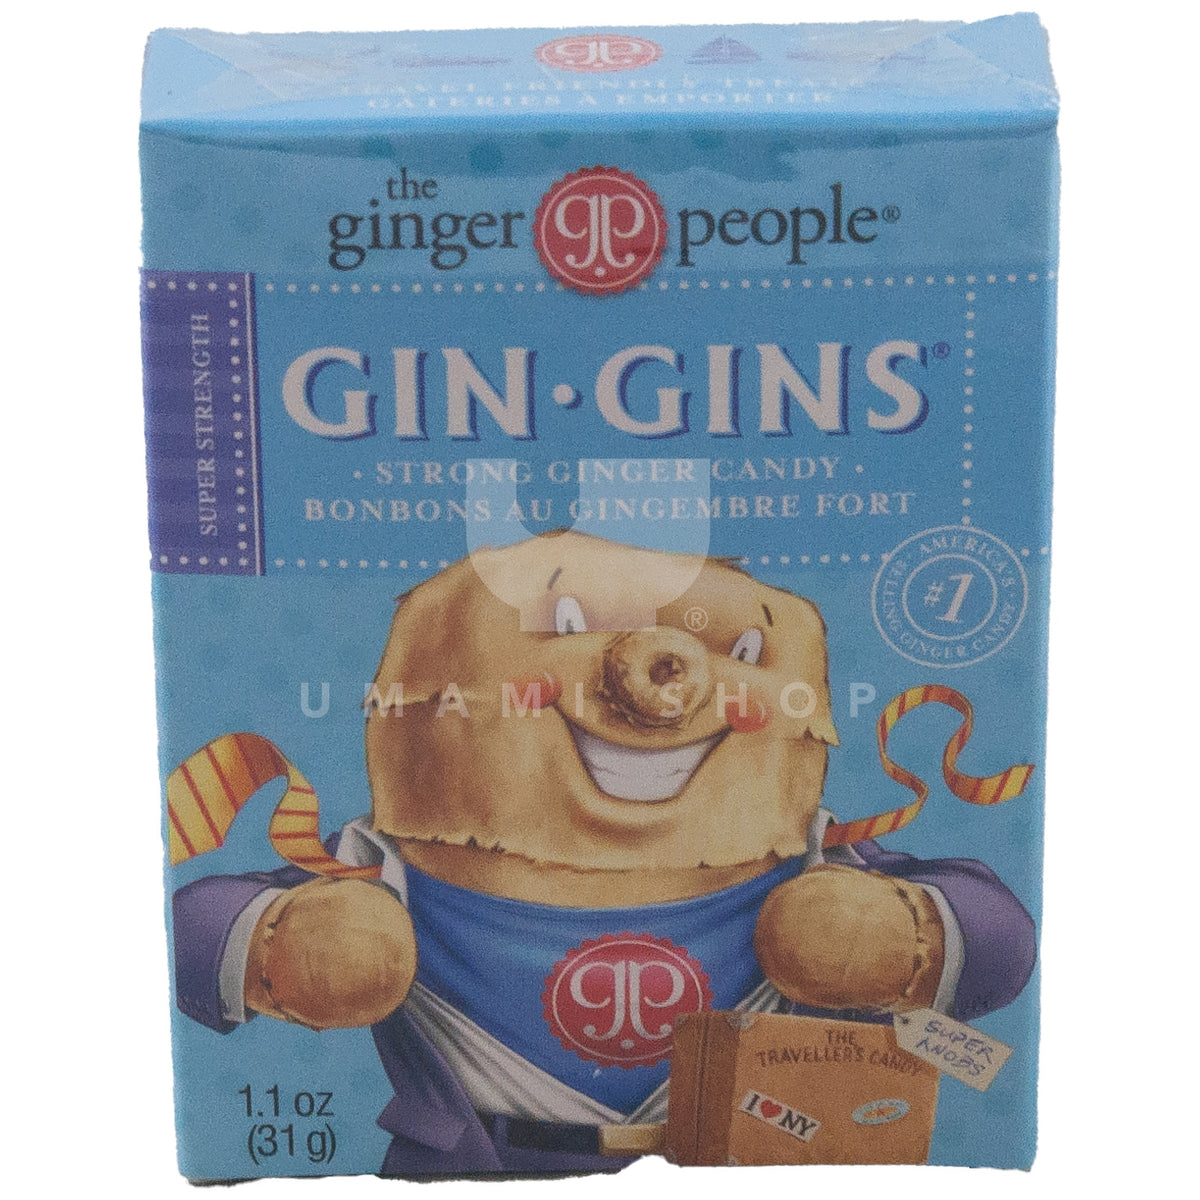 Bonbon au gingembre super fort Gin Gins® - The Ginger People